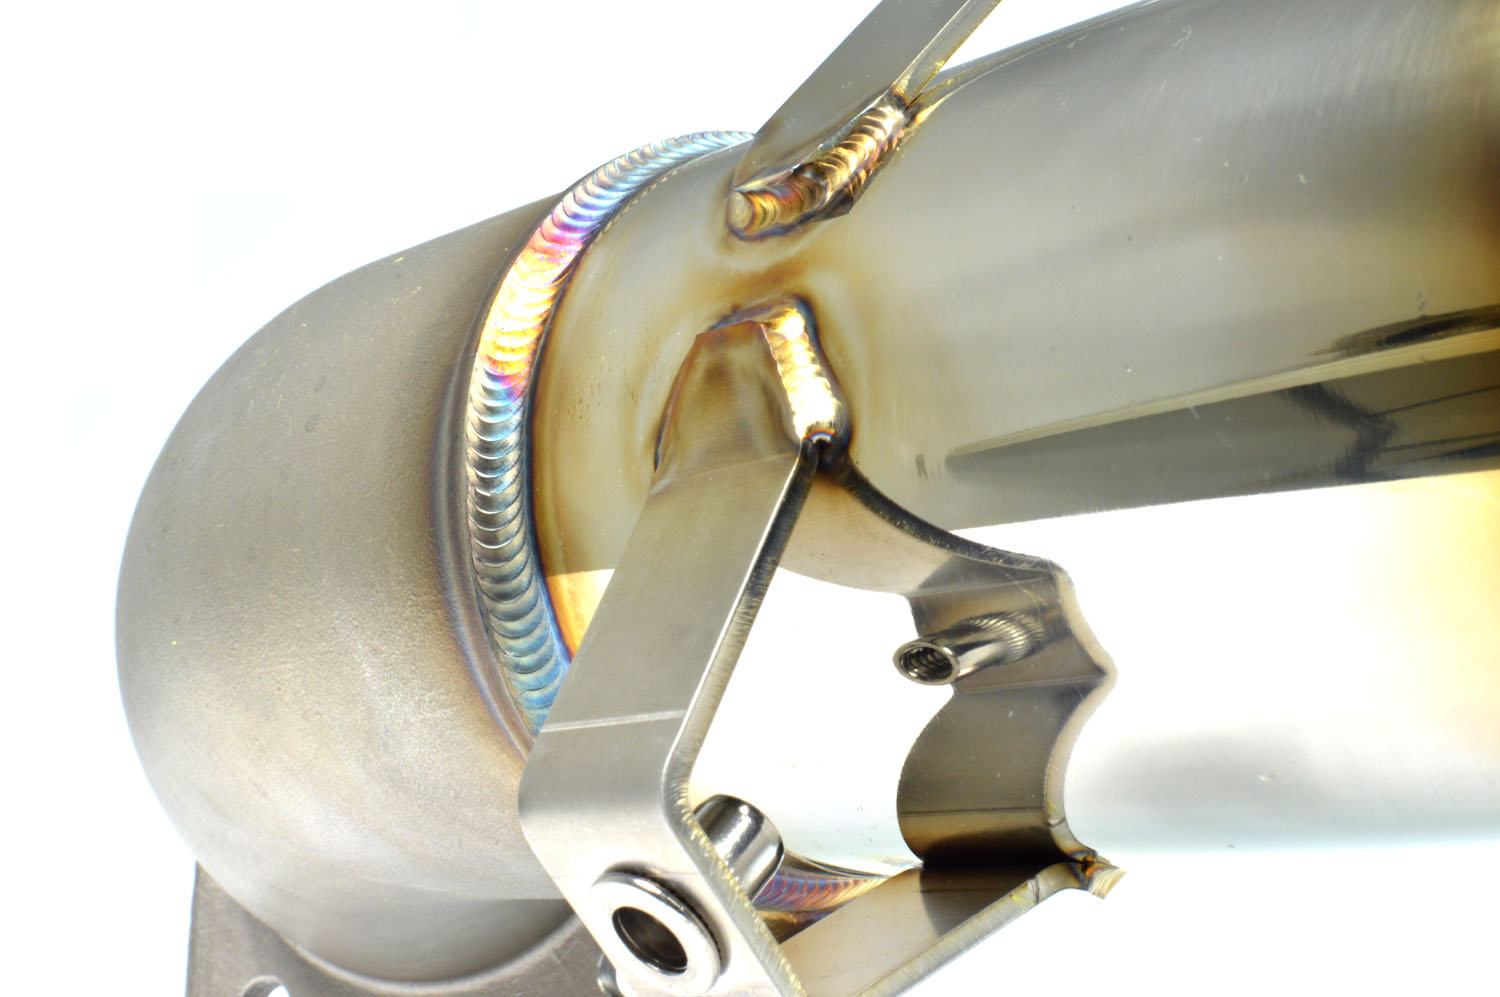 11th Gen Honda Civic 27WON 80mm down-pipe now available Civic-Downpipe-TIG-Welds